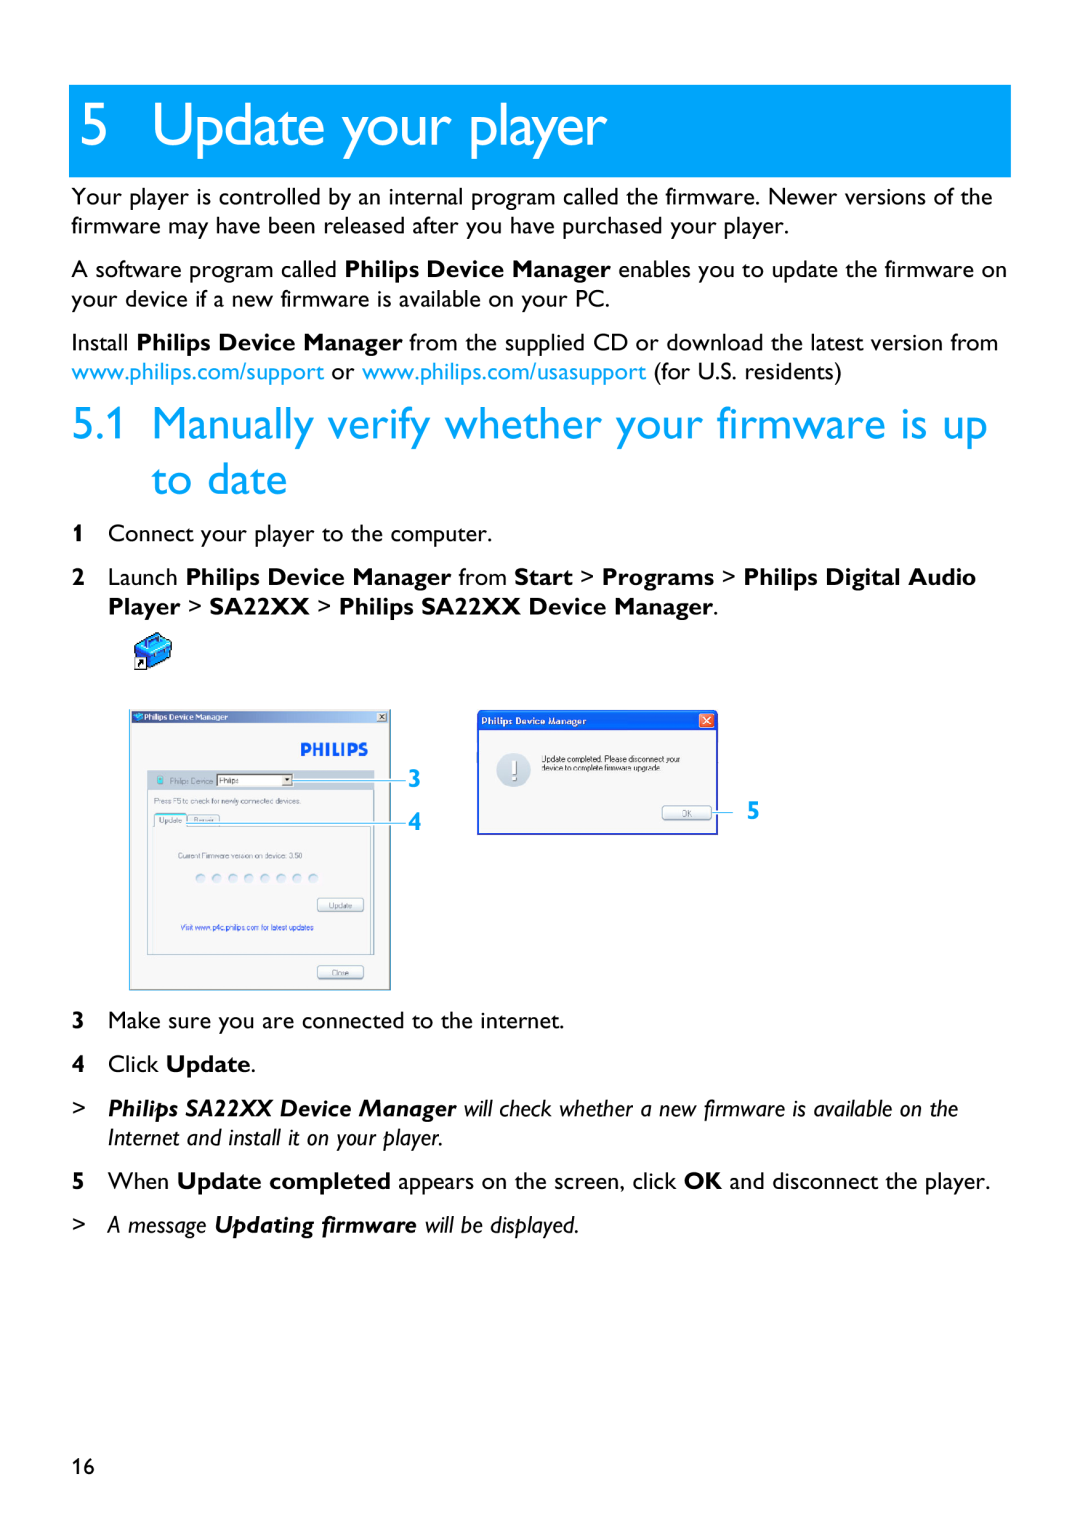 Philips SA2200 manual Update your player, Manually verify whether your firmware is up to date 